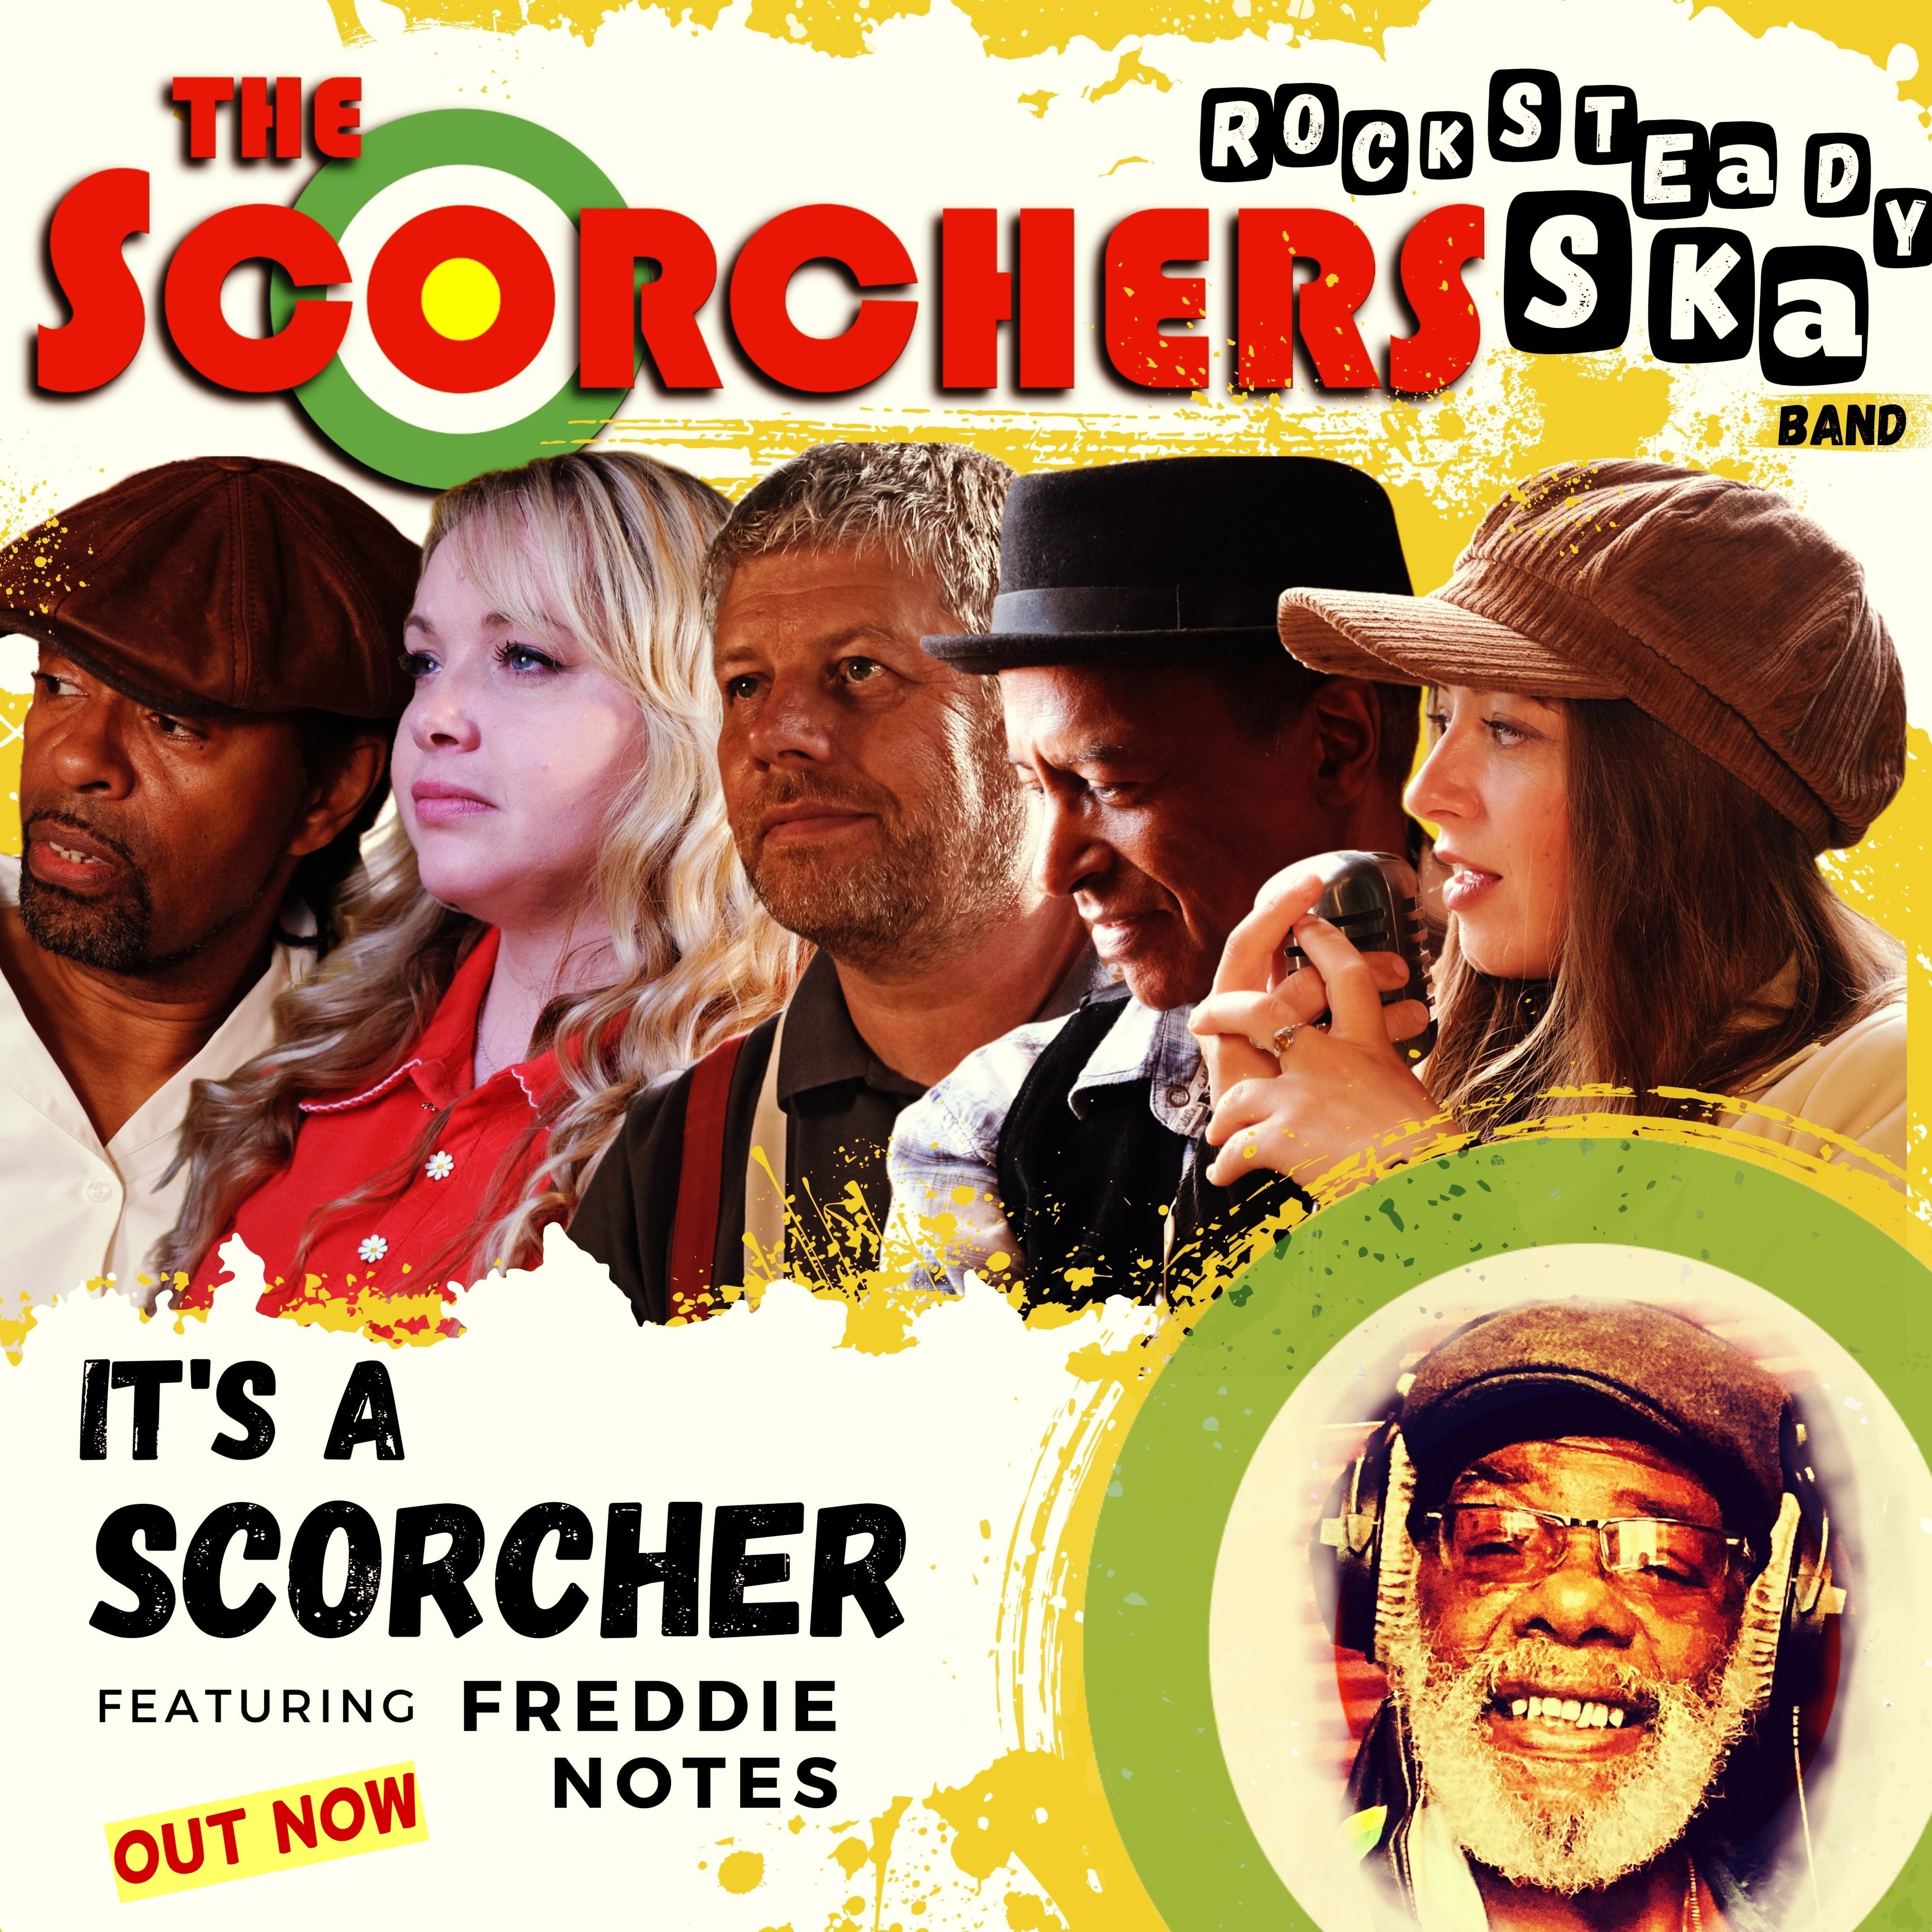 The Scorchers Rocksteady Ska Band and Freddie Notes Rejuvenate Listeners with Melodic Rhythms and Powerful Vocals